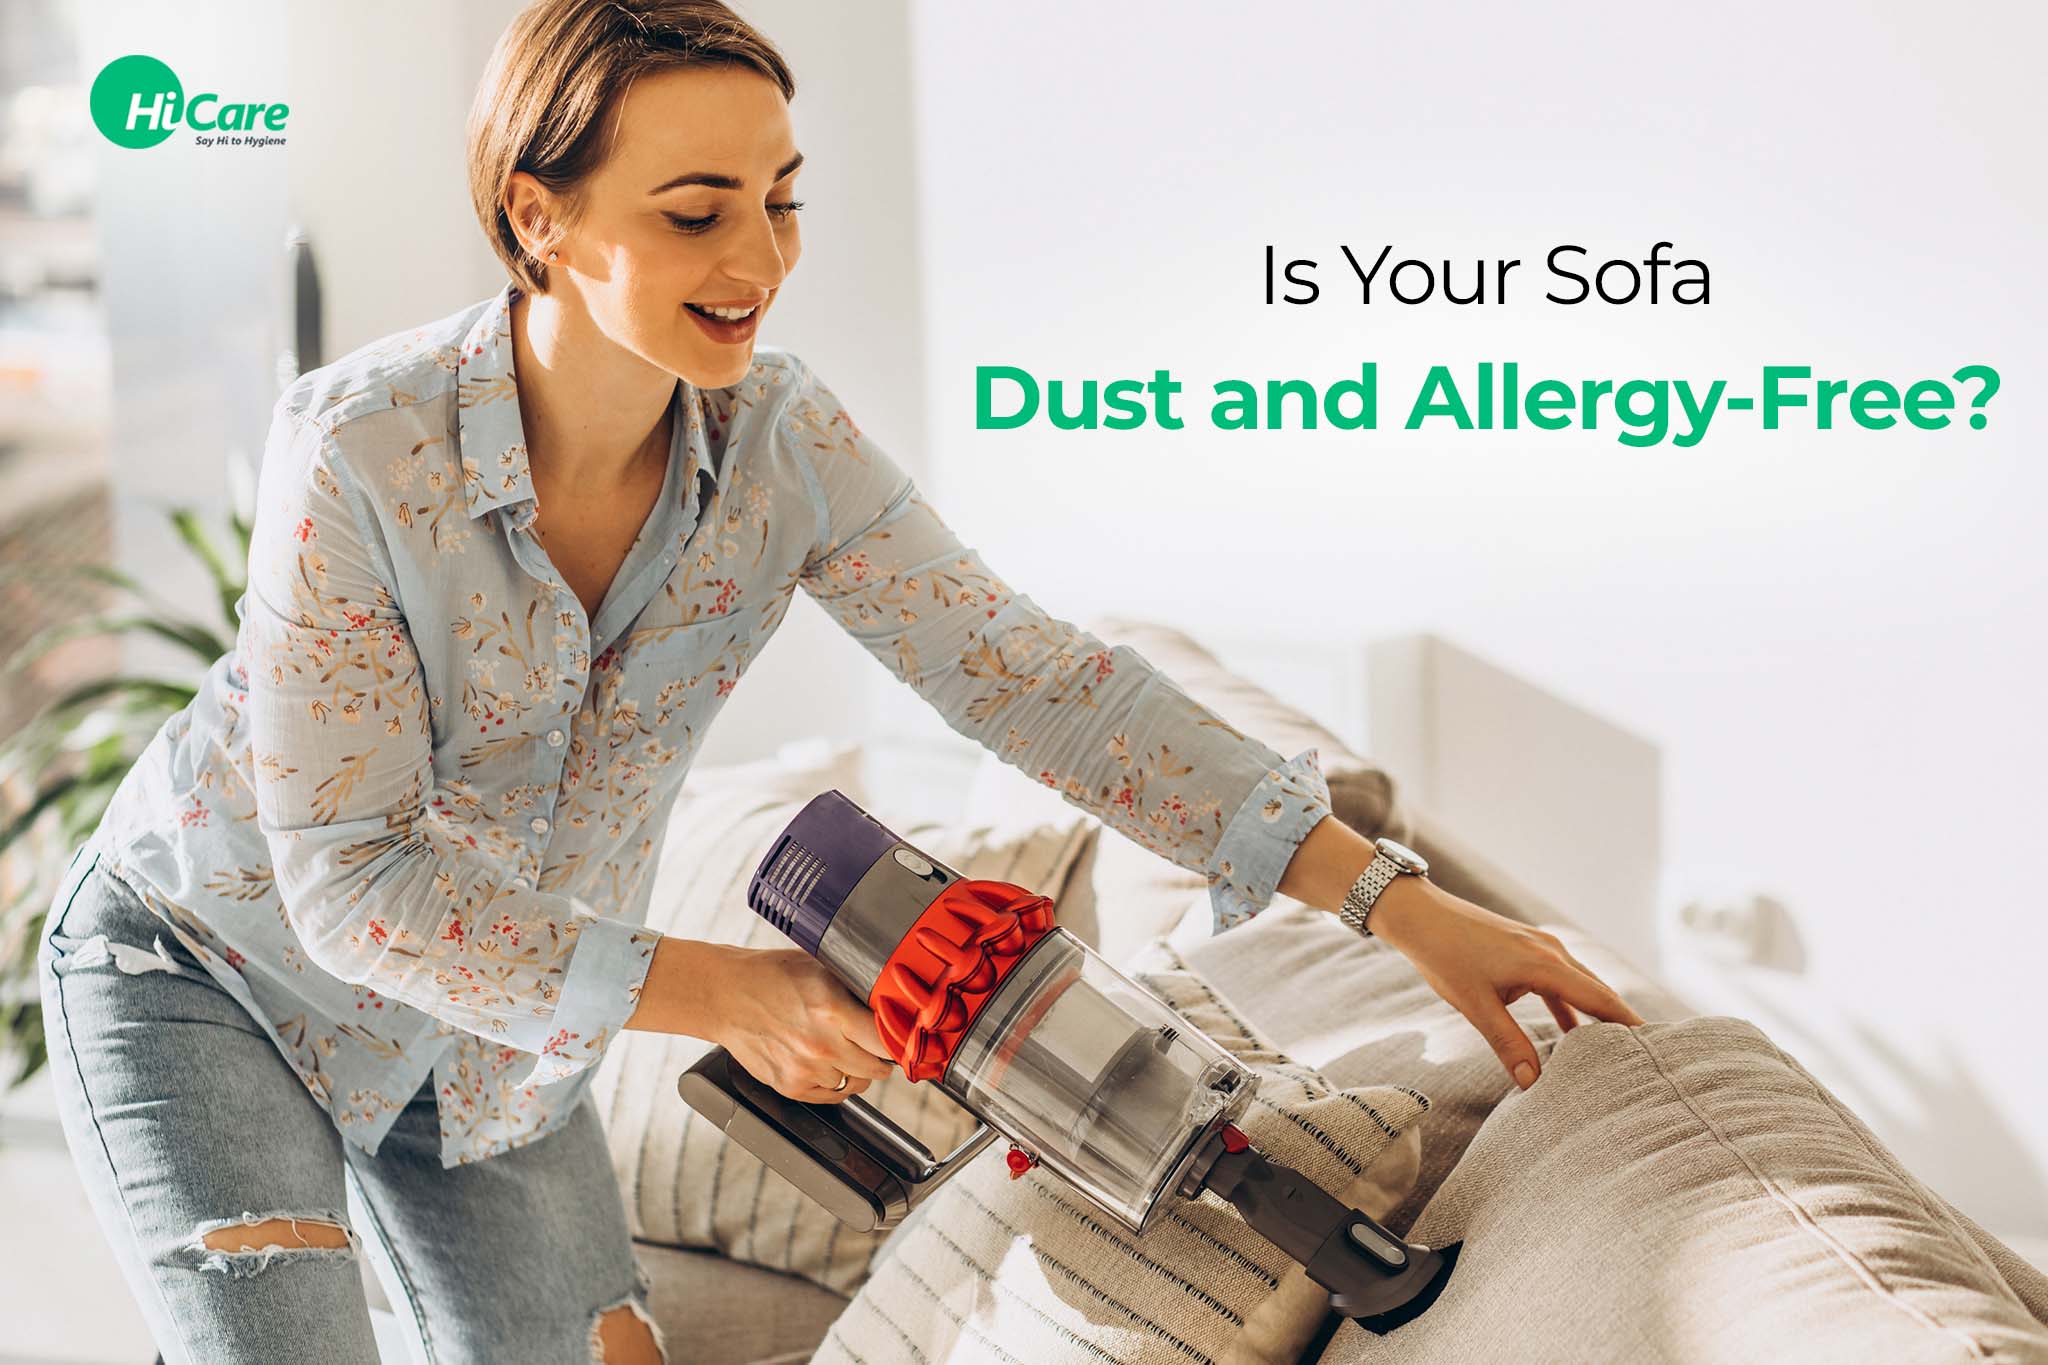 Is Your Sofa Dust and Allergy-Free?